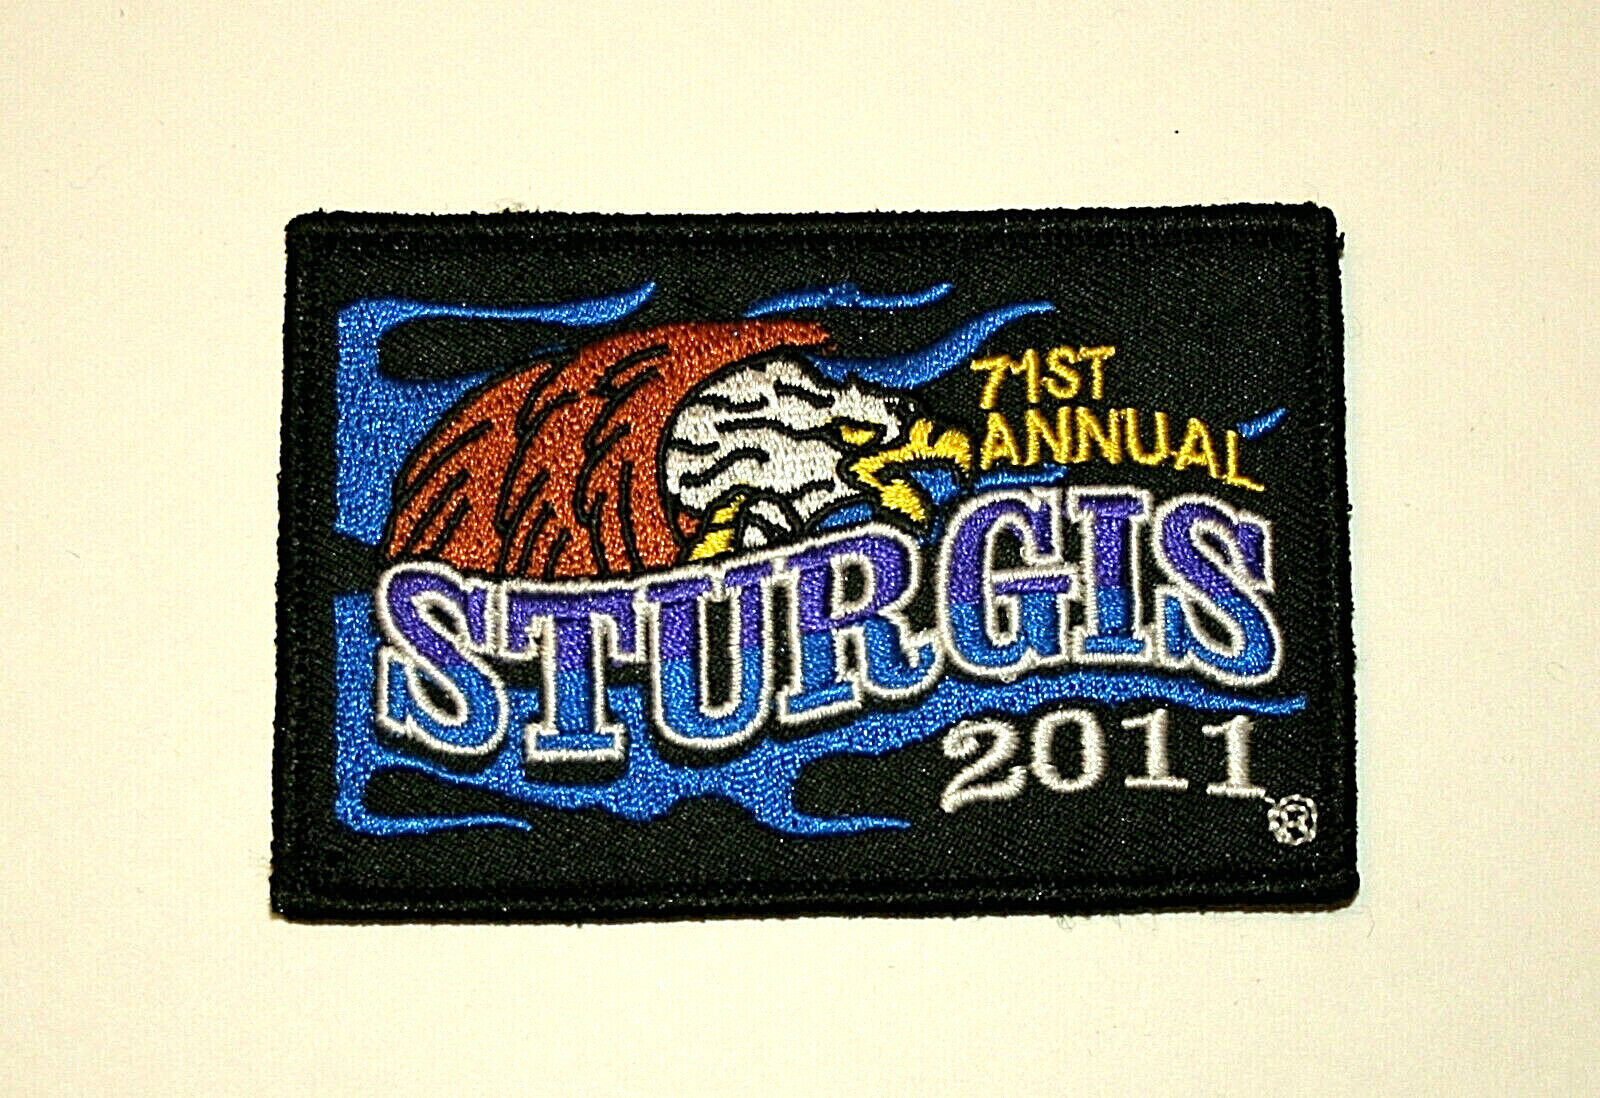 71st Annual Sturgis MotorCycle Meet Event 2011 Cloth Jacket Patch New NOS